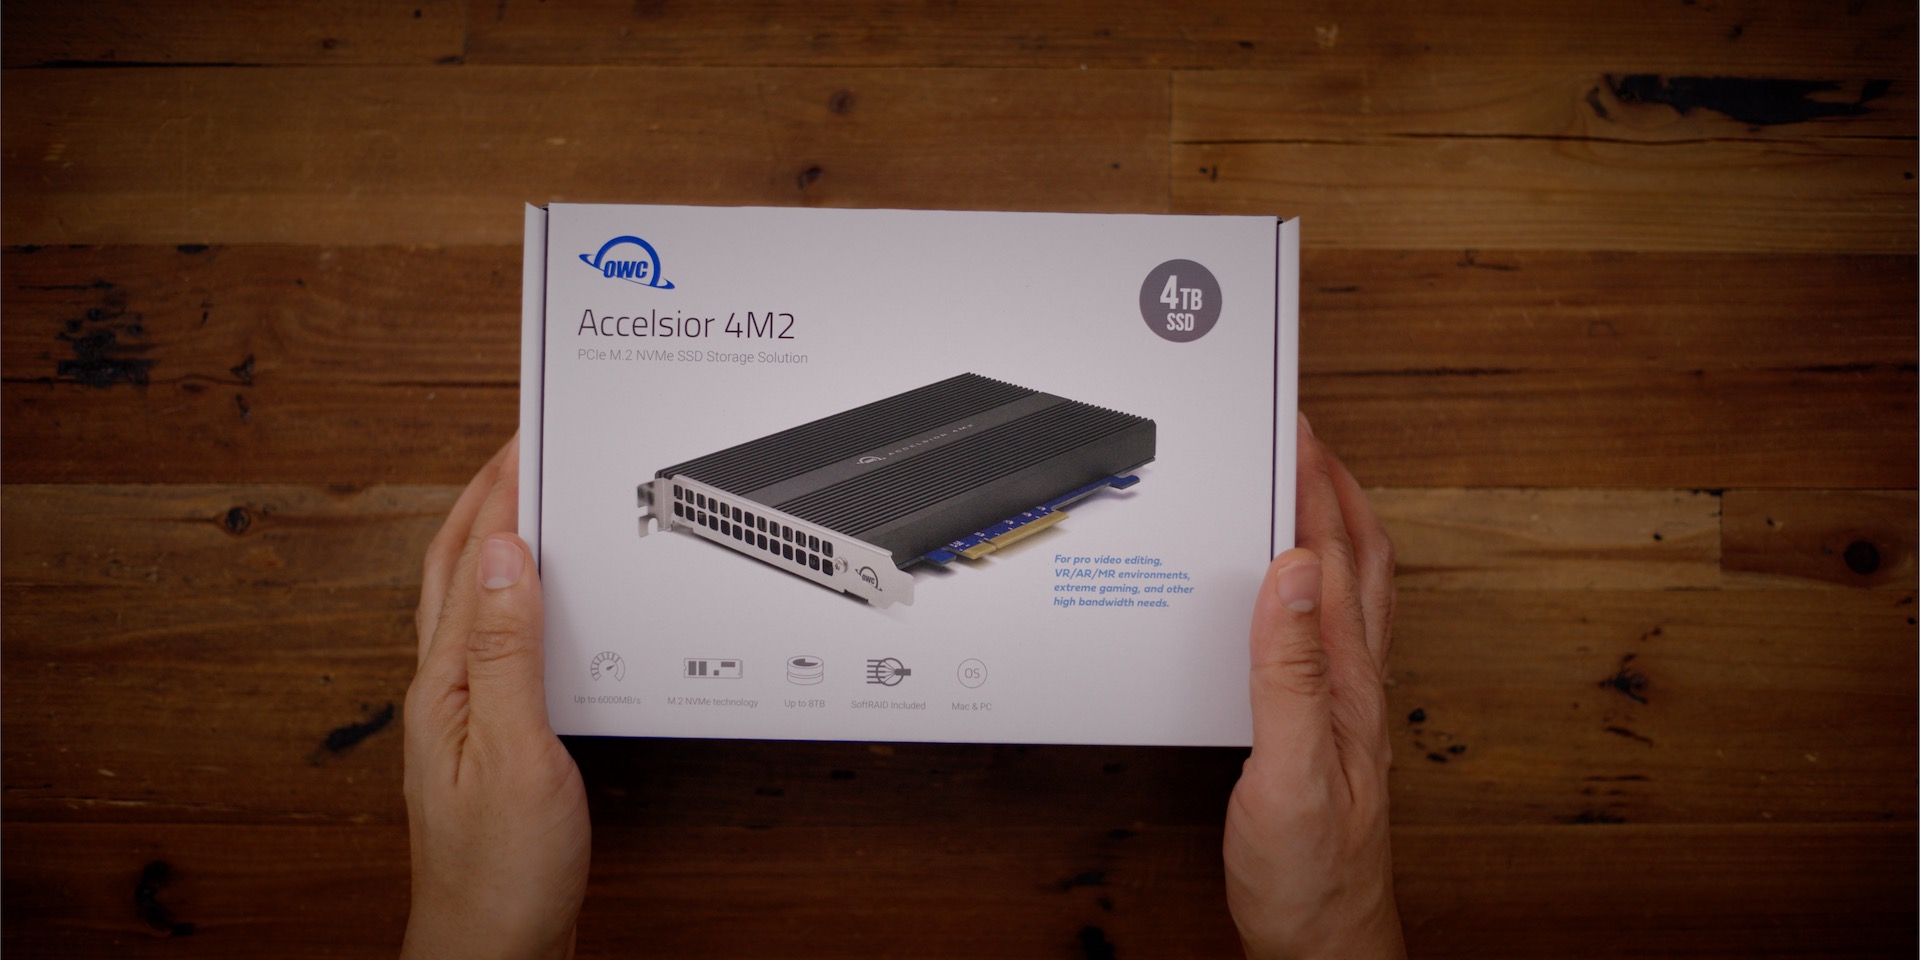 OWC Accelsior 4M2 SSD for Apple Mac Pro